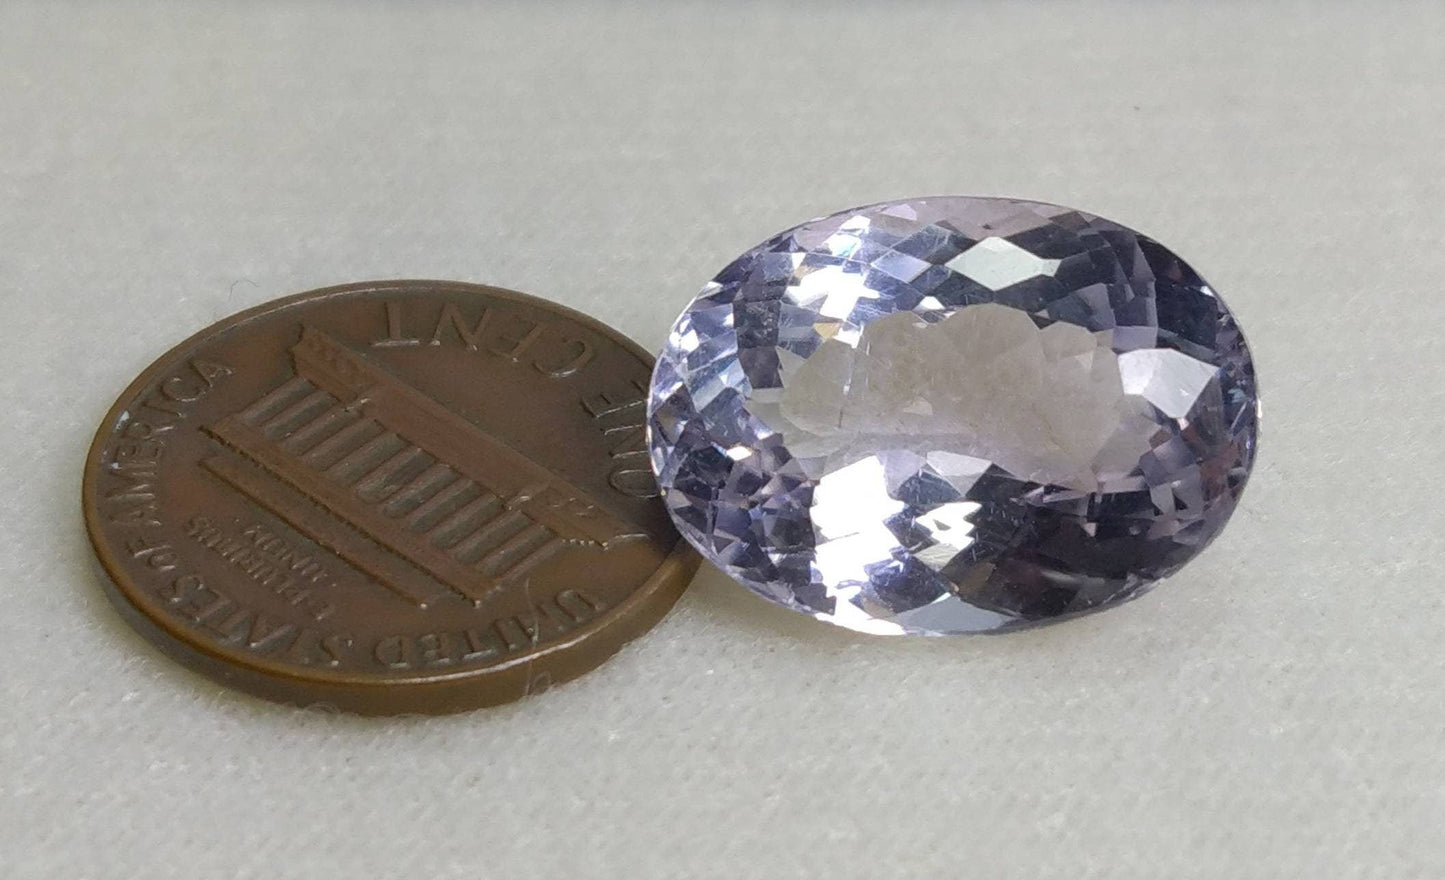 ARSAA GEMS AND MINERALSNatural fine quality beautiful 16 carats oval shape faceted kunzite gem - Premium  from ARSAA GEMS AND MINERALS - Just $32.00! Shop now at ARSAA GEMS AND MINERALS